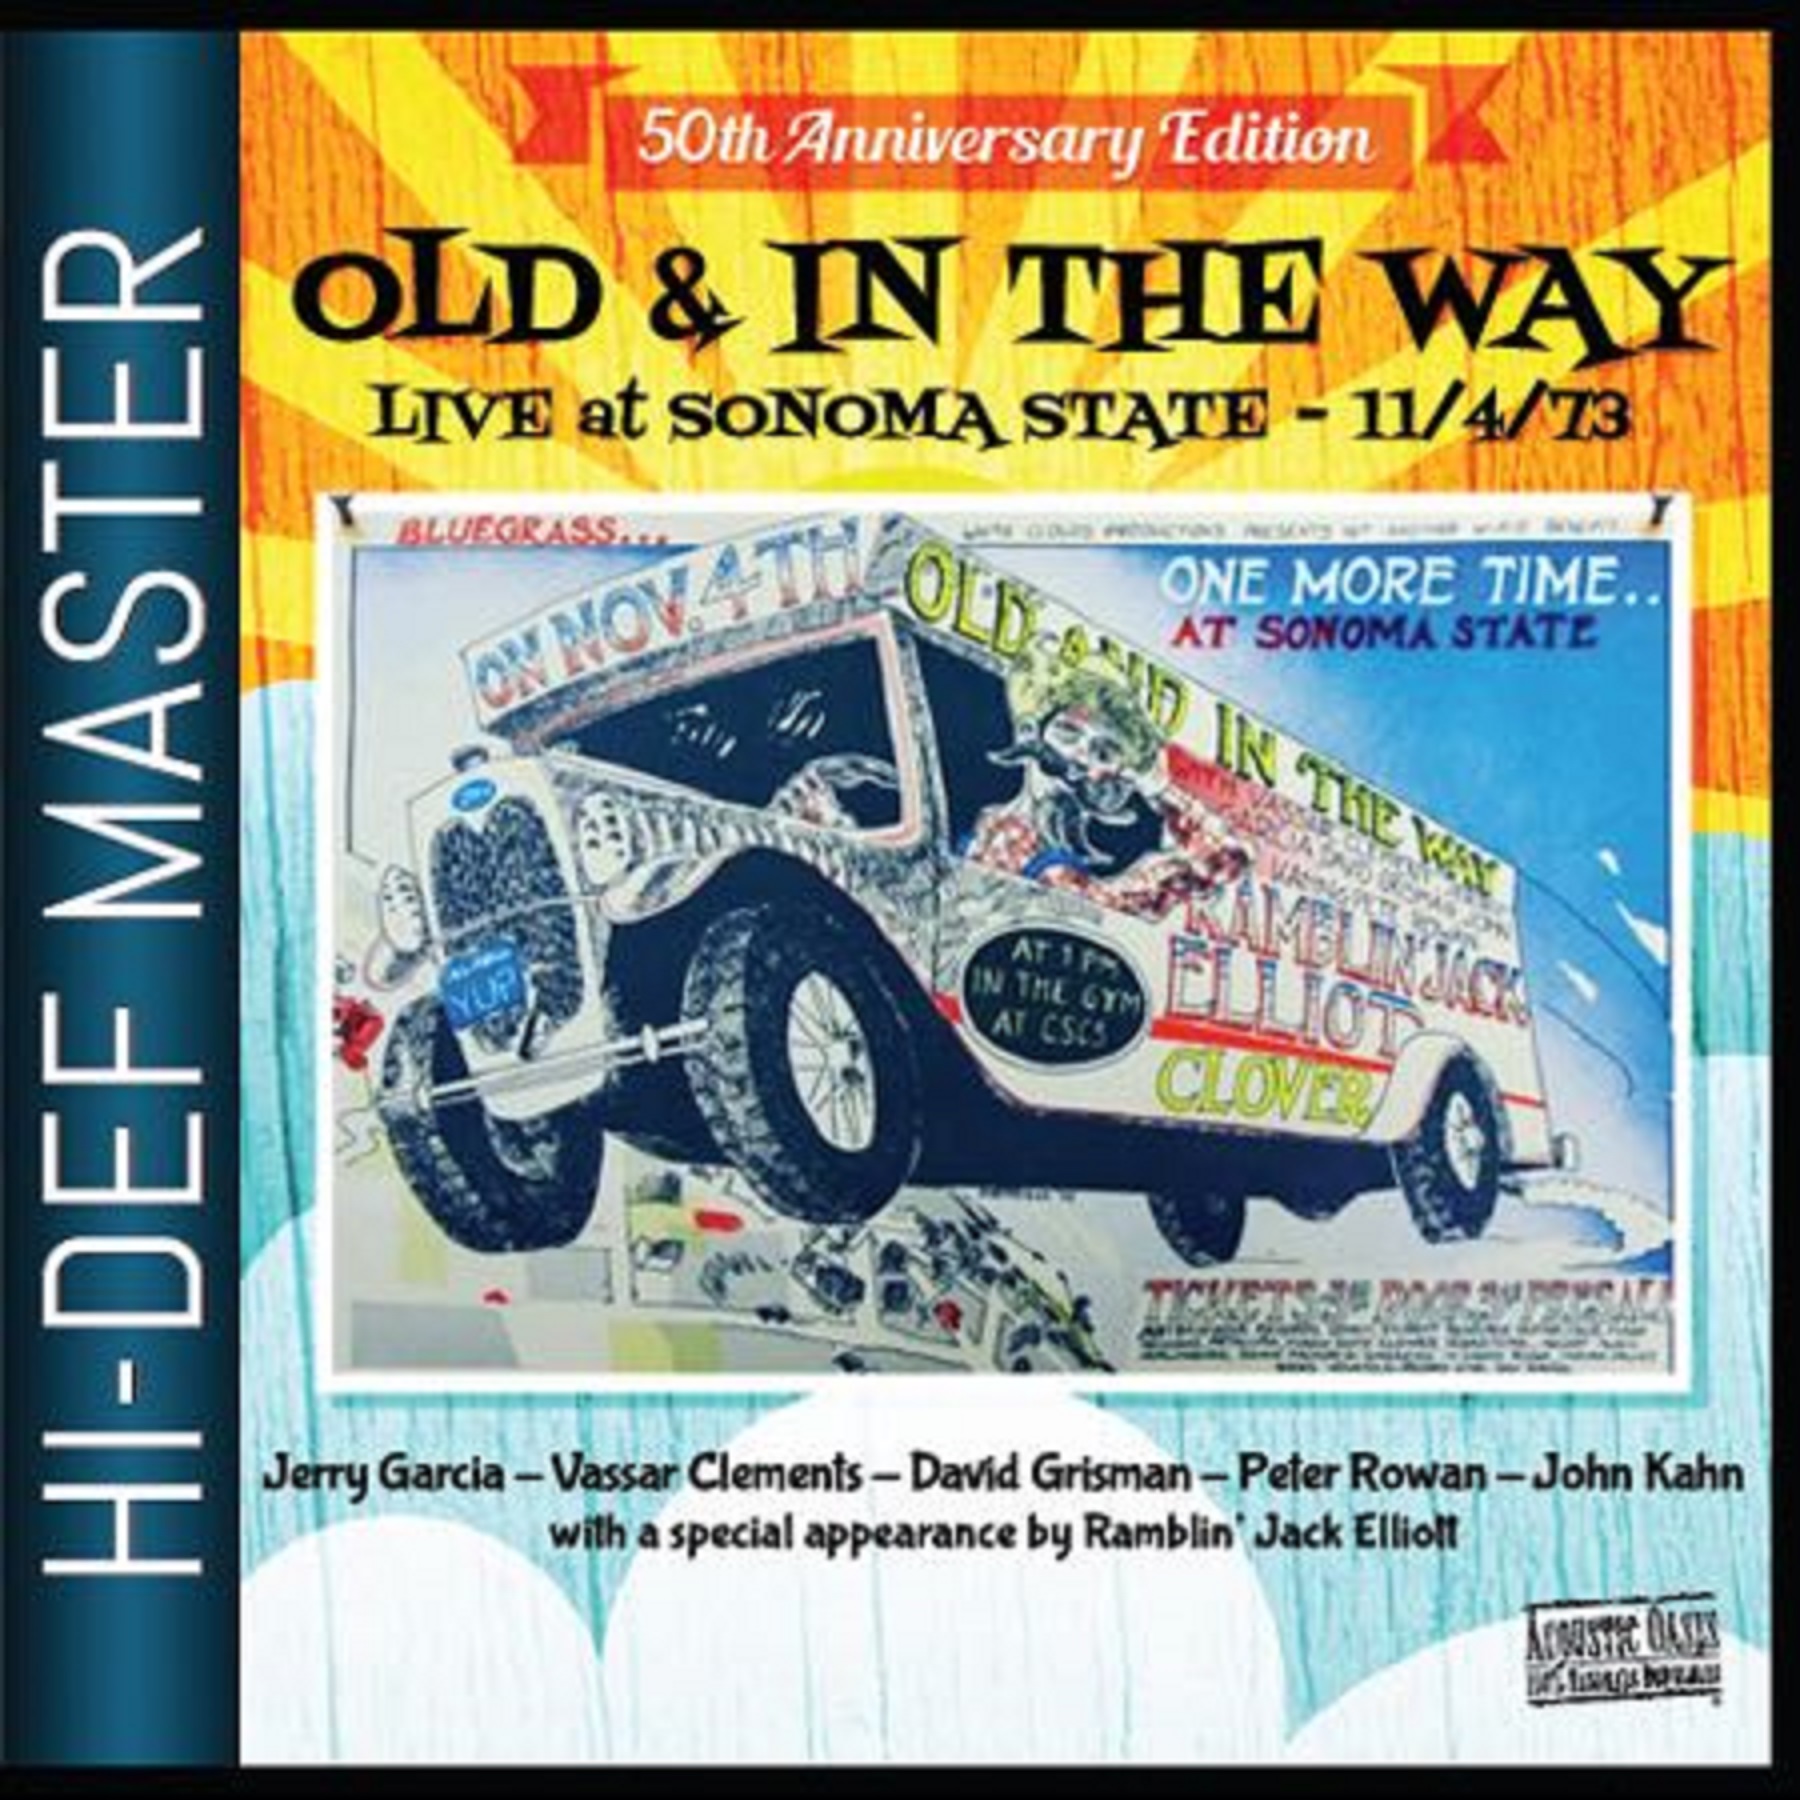 Album Review: Old & In the Way – Live at Sonoma State 11/4/73